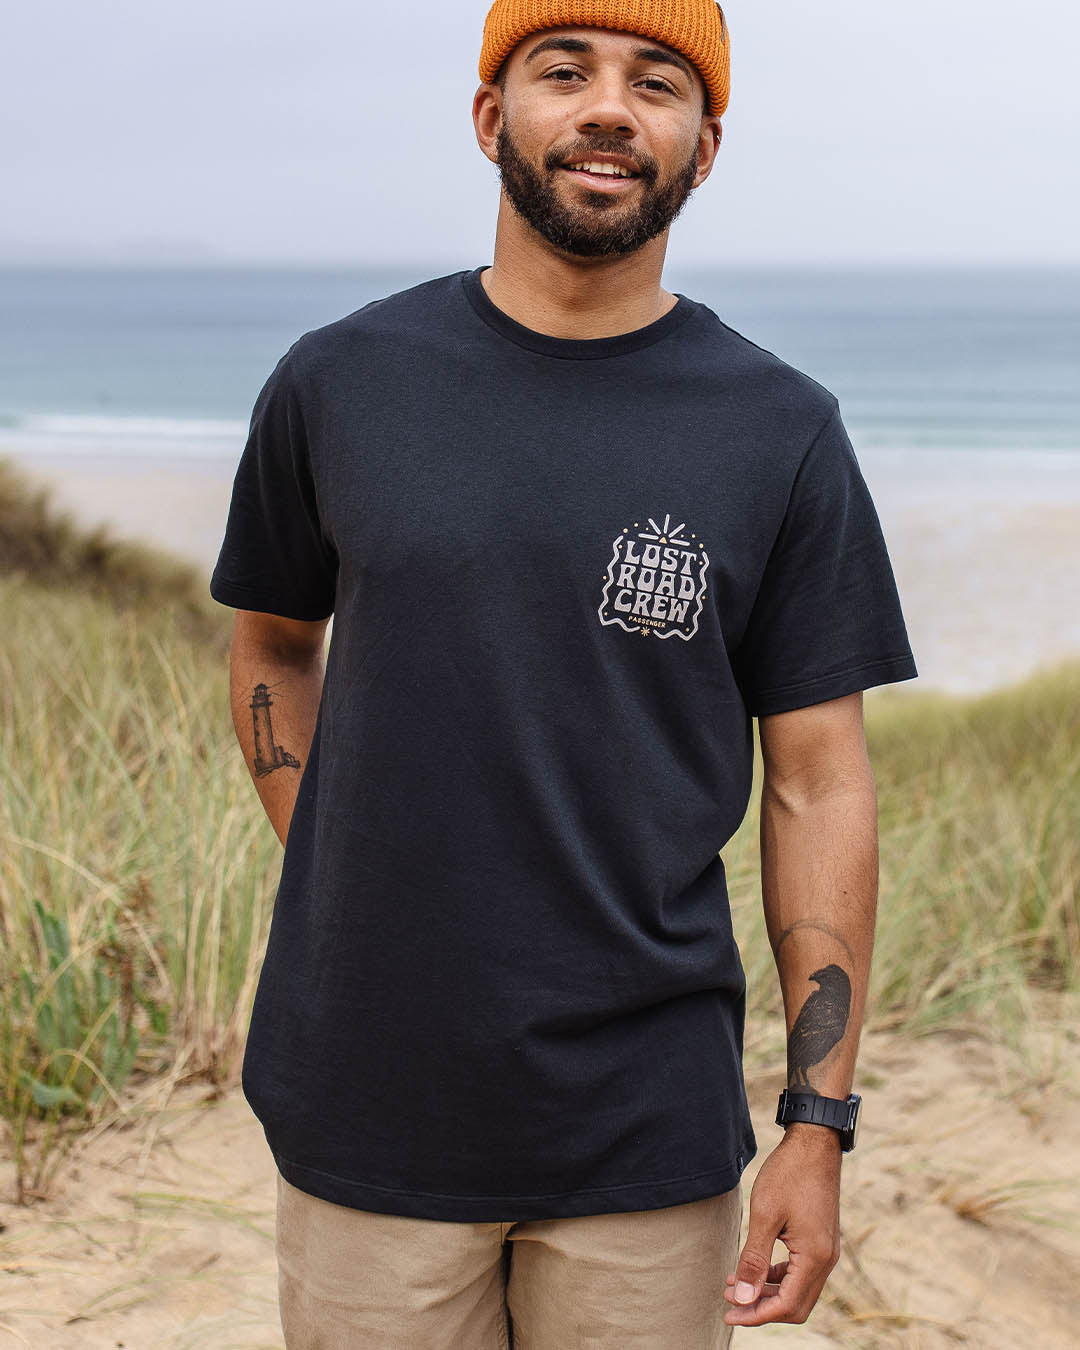 Lost Road Recycled Cotton T-Shirt - Black